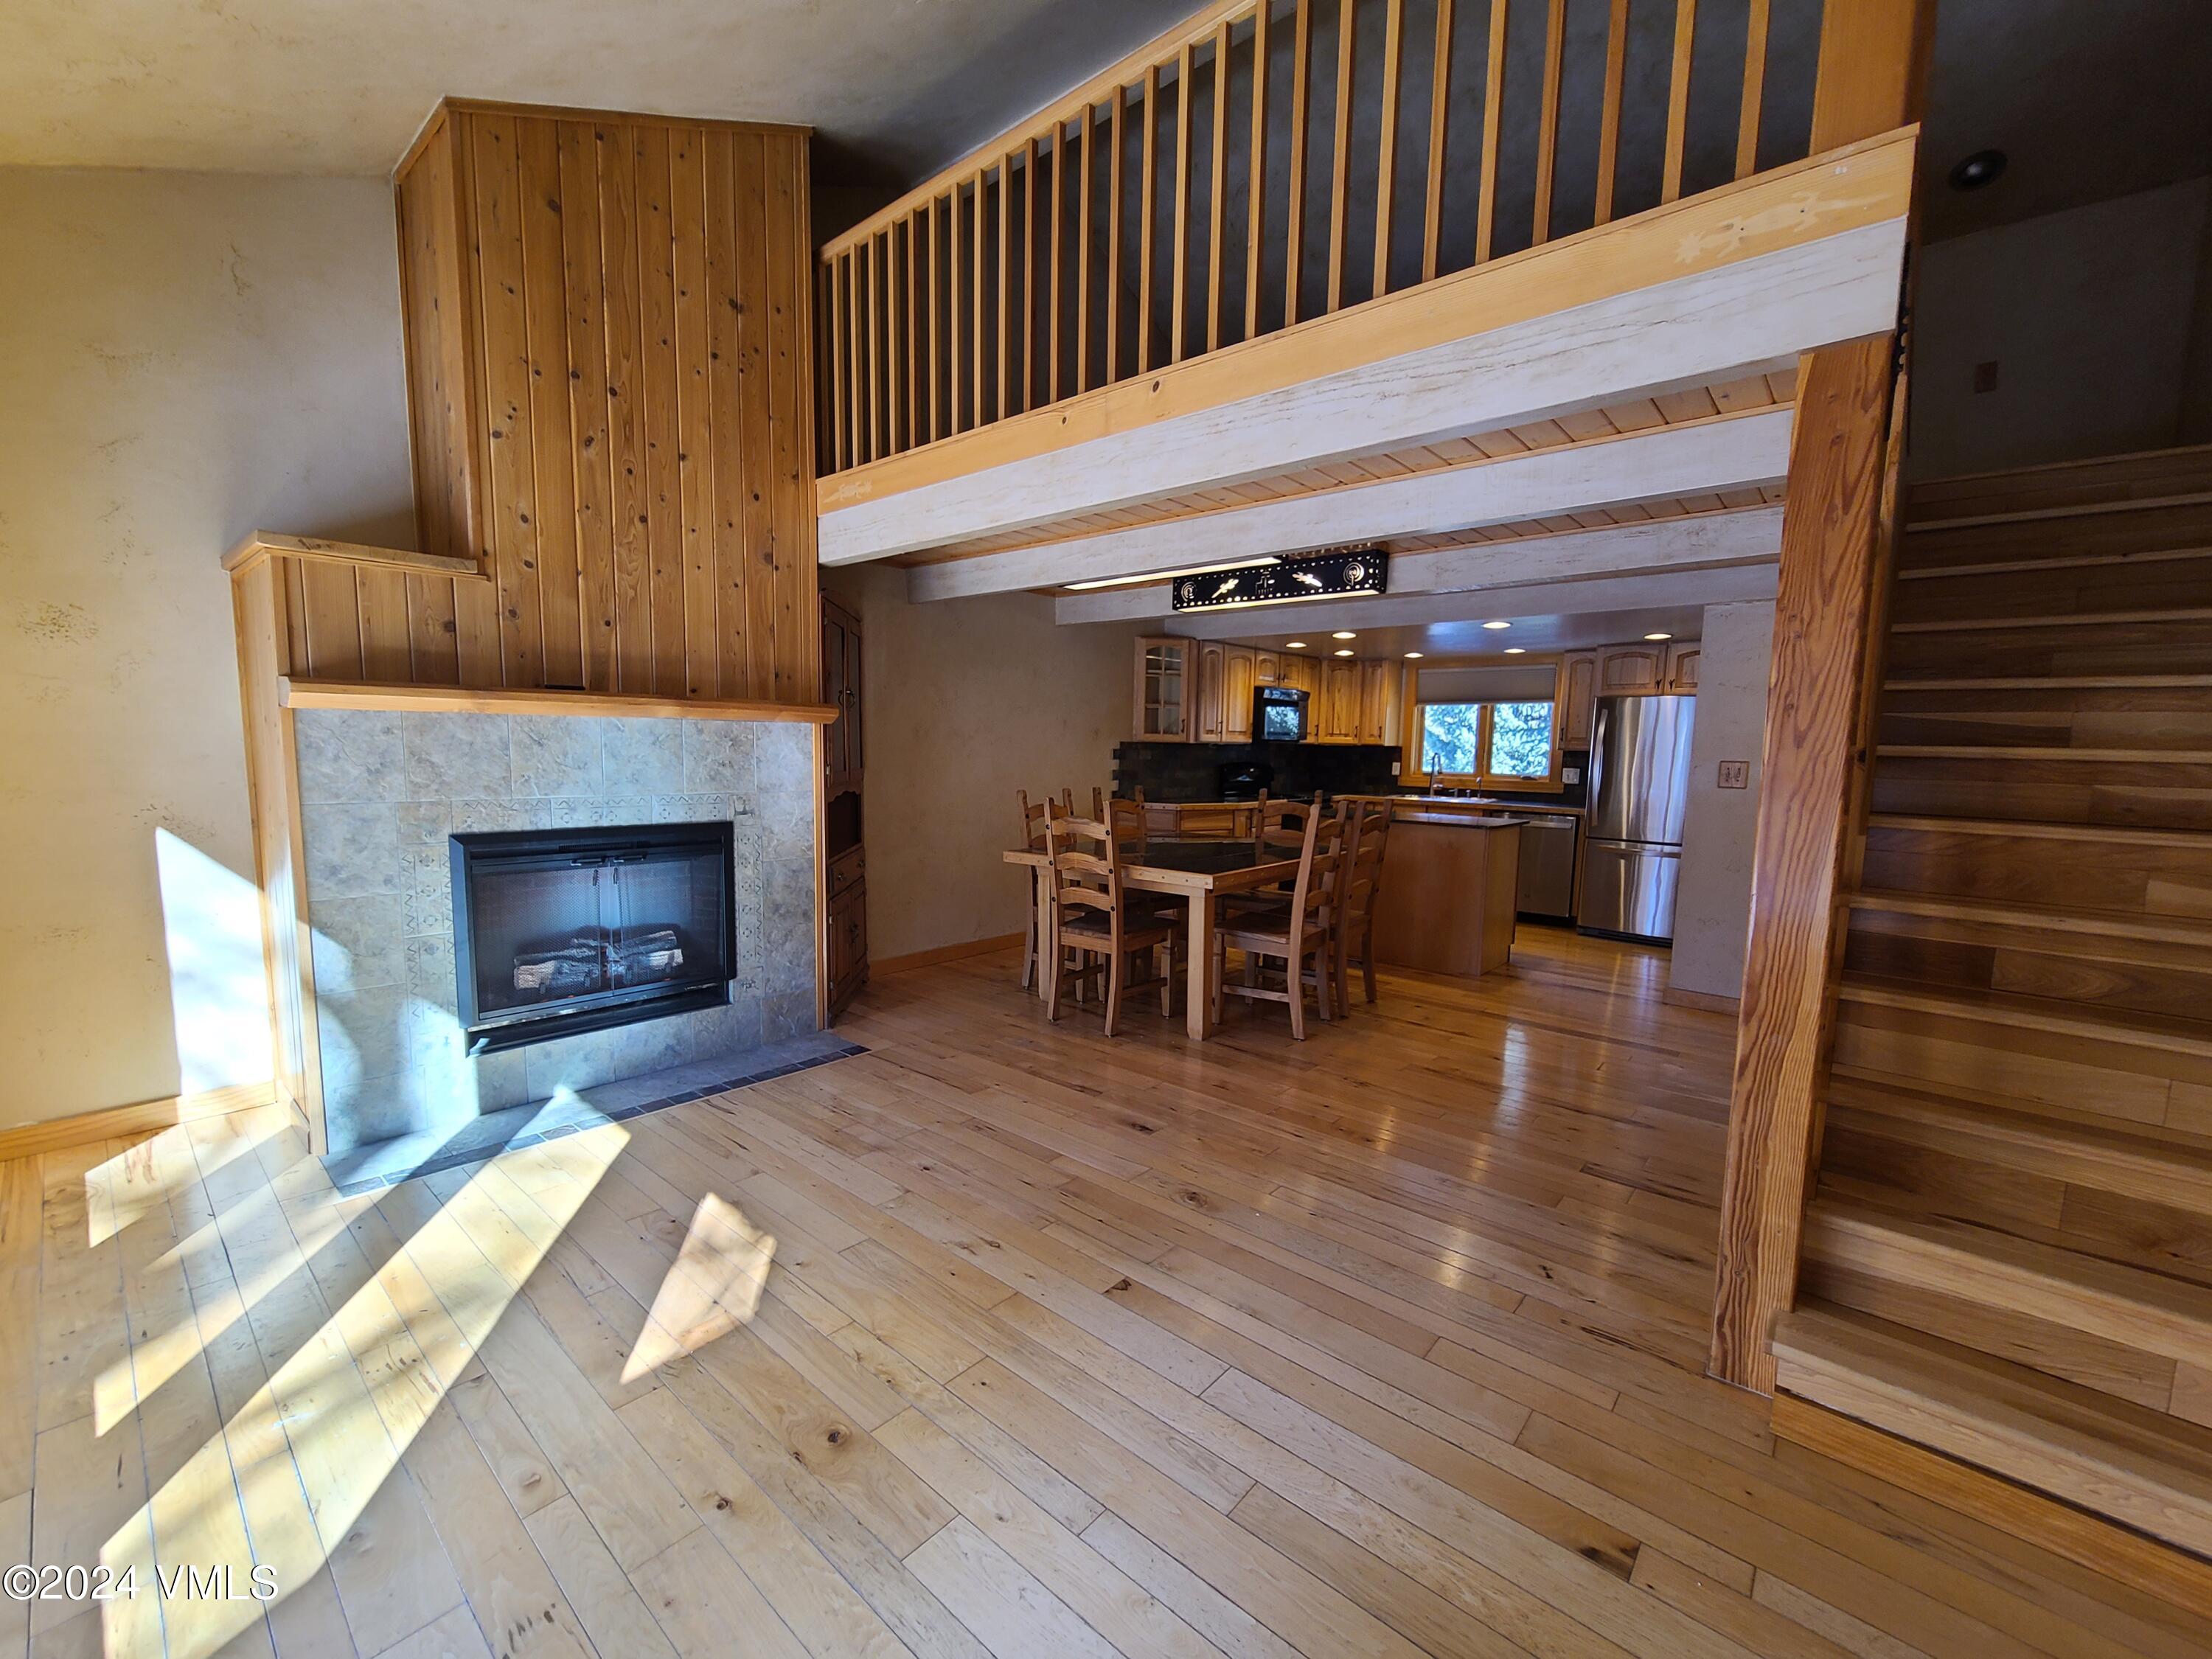 a view of a livingroom with furniture wooden floor fireplace and staircase